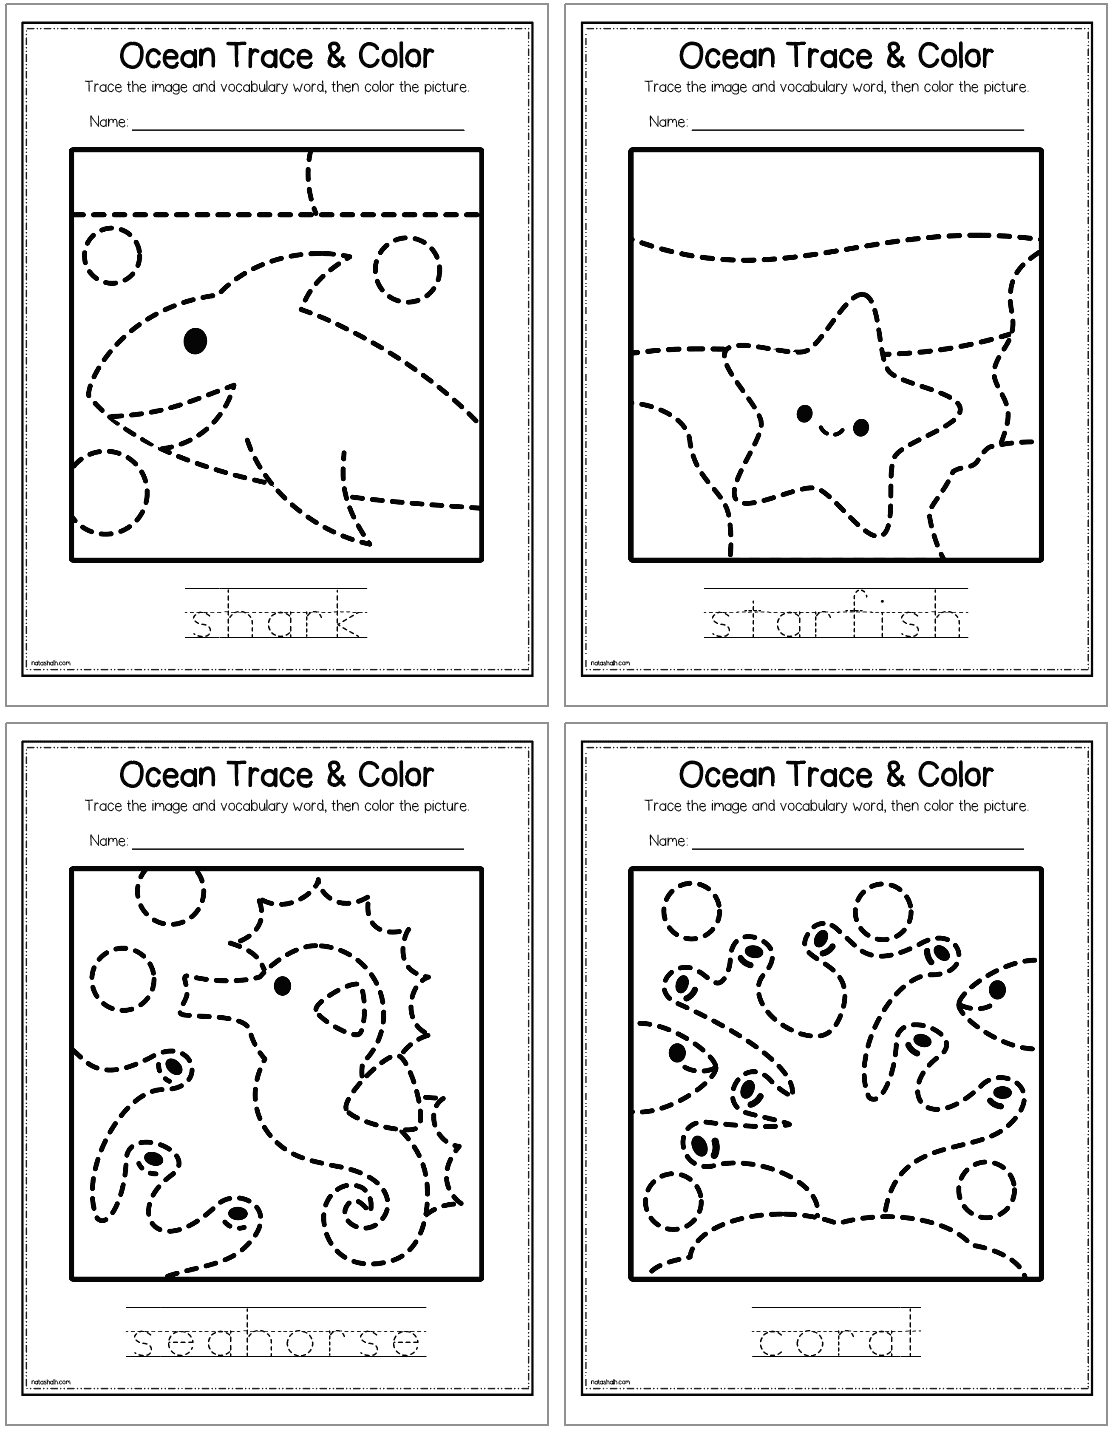 A preview of four ocean animal themed tracing and coloring pages for kids. Animals include:  shark, starfish, seahorse, and coral.